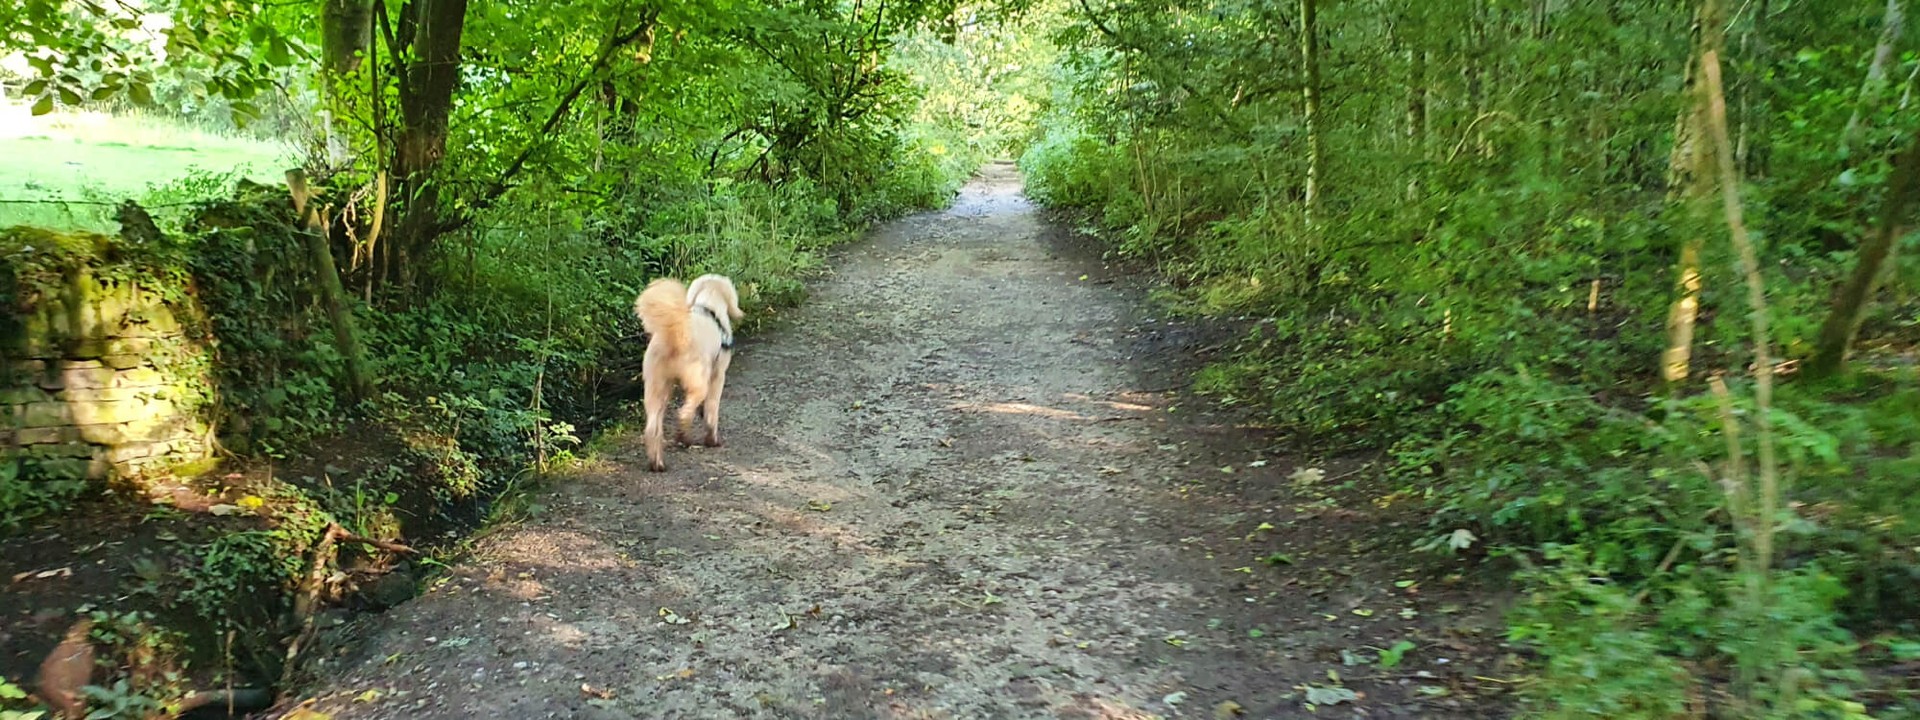 muddy path surrounded by trees with a dog to the left